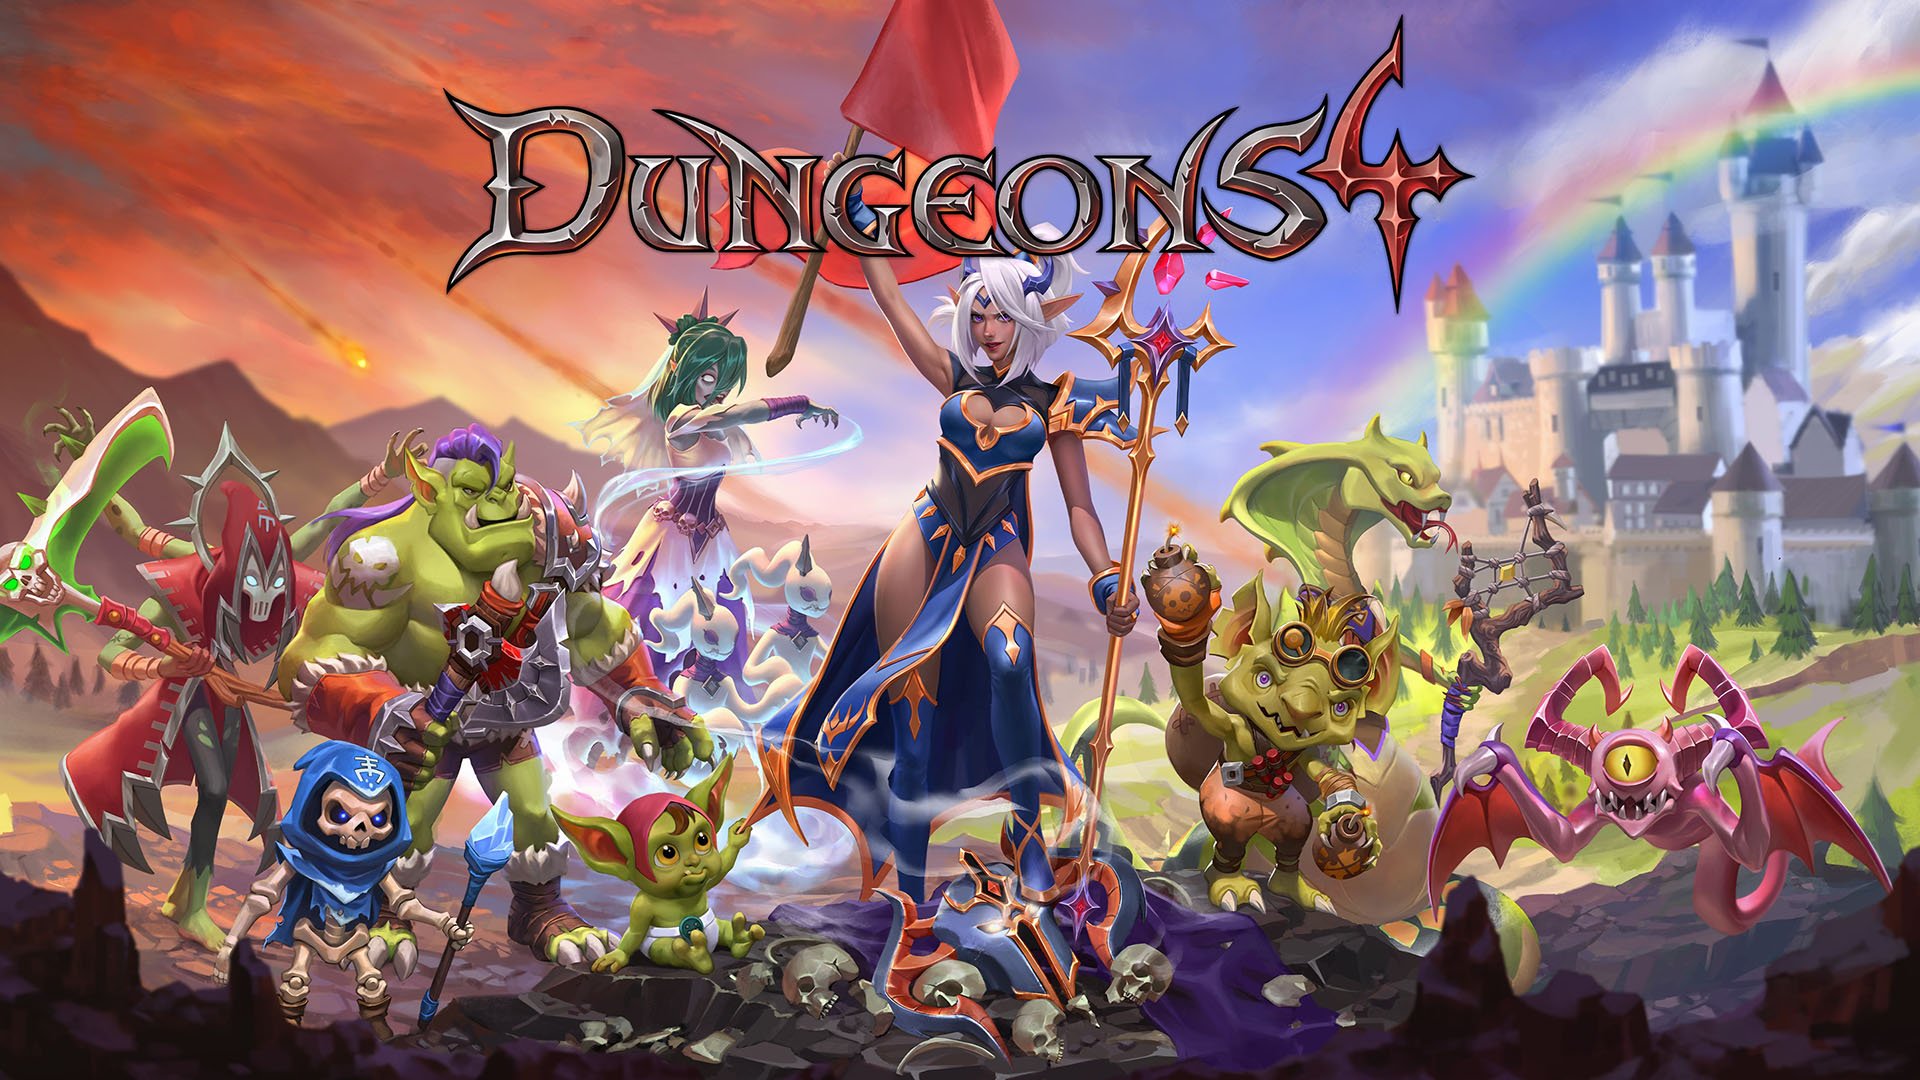 Dungeons & Dragons RPG coming to PS4 and Xbox One - KLGadgetGuy